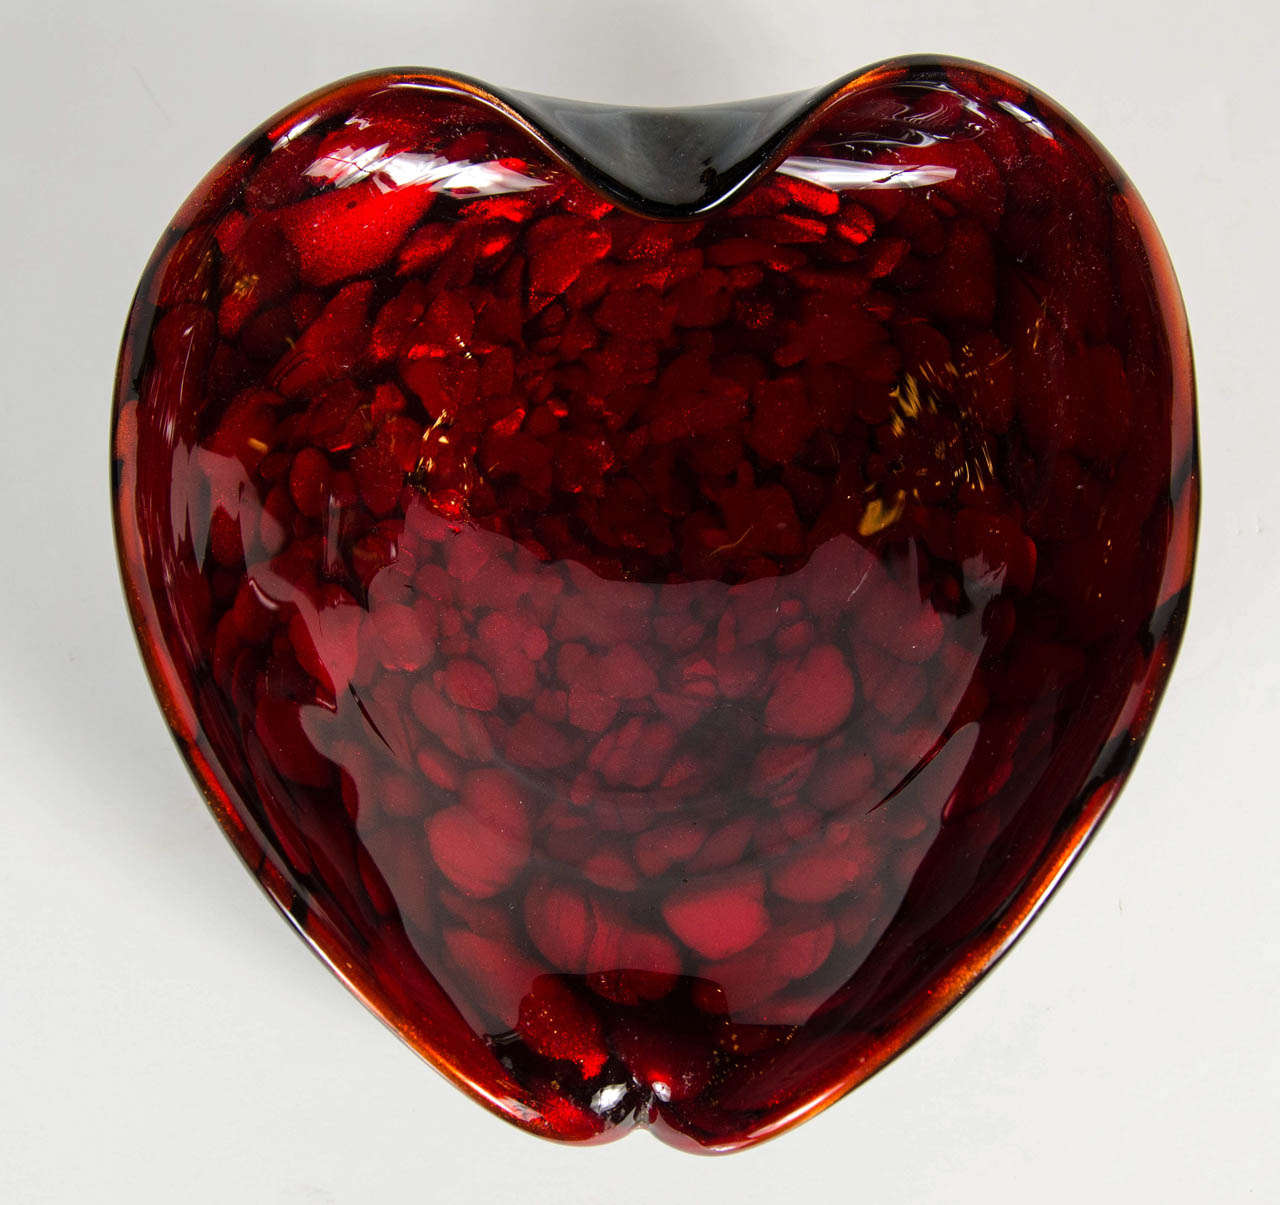 This gorgeous bowl features a stylized modernist form in shades of ruby on a black glass surround.